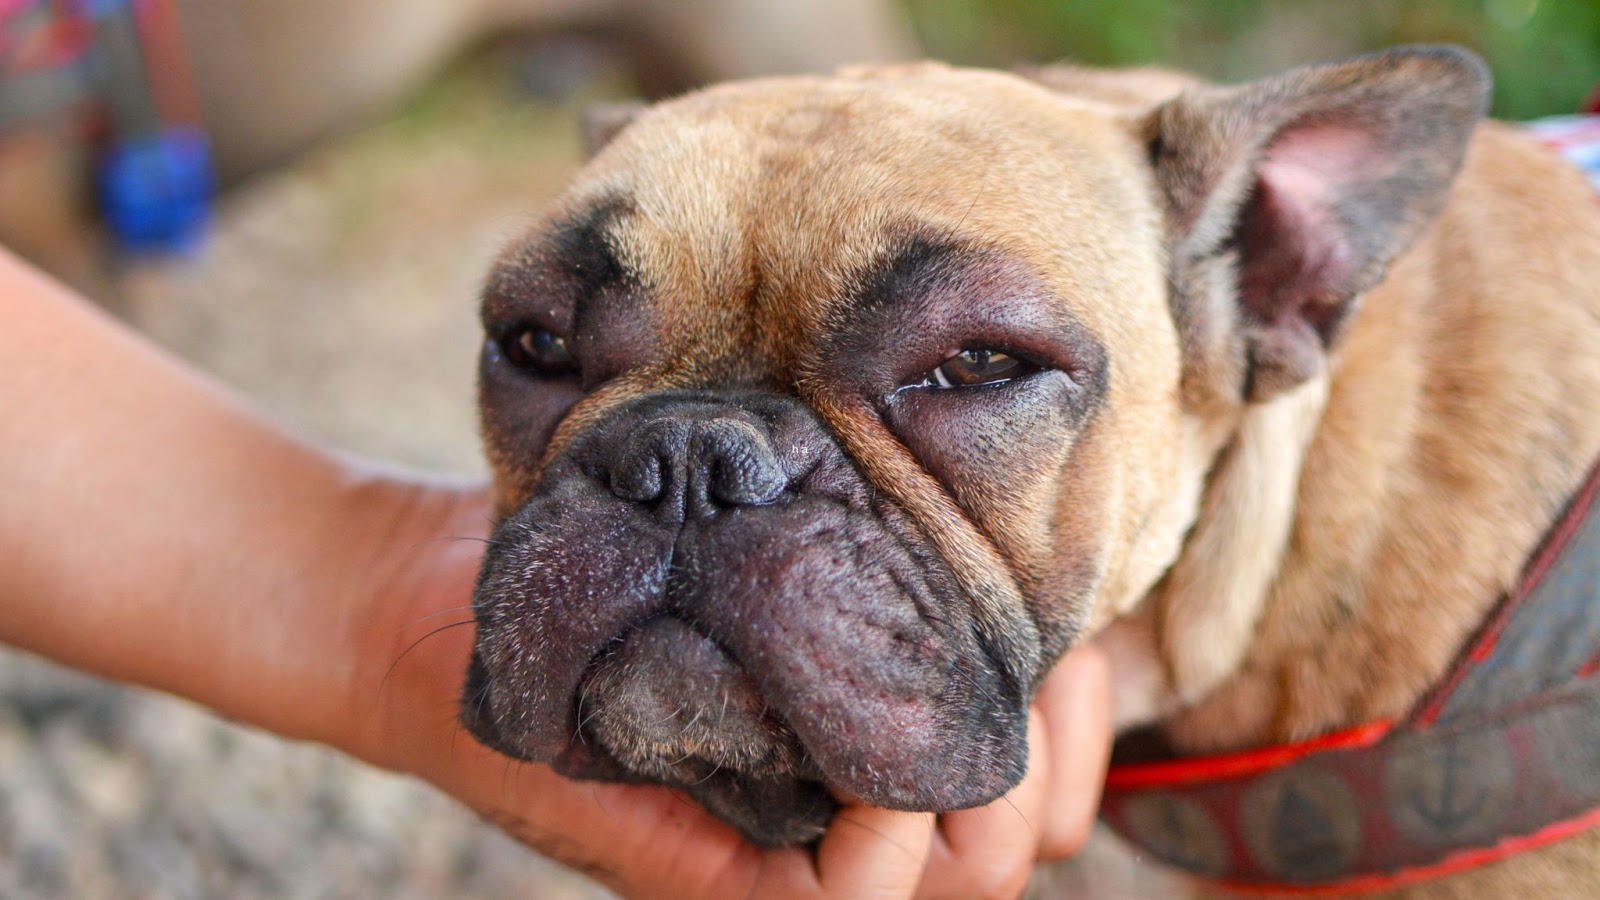 French bulldog dog with swollen face stung by a bee